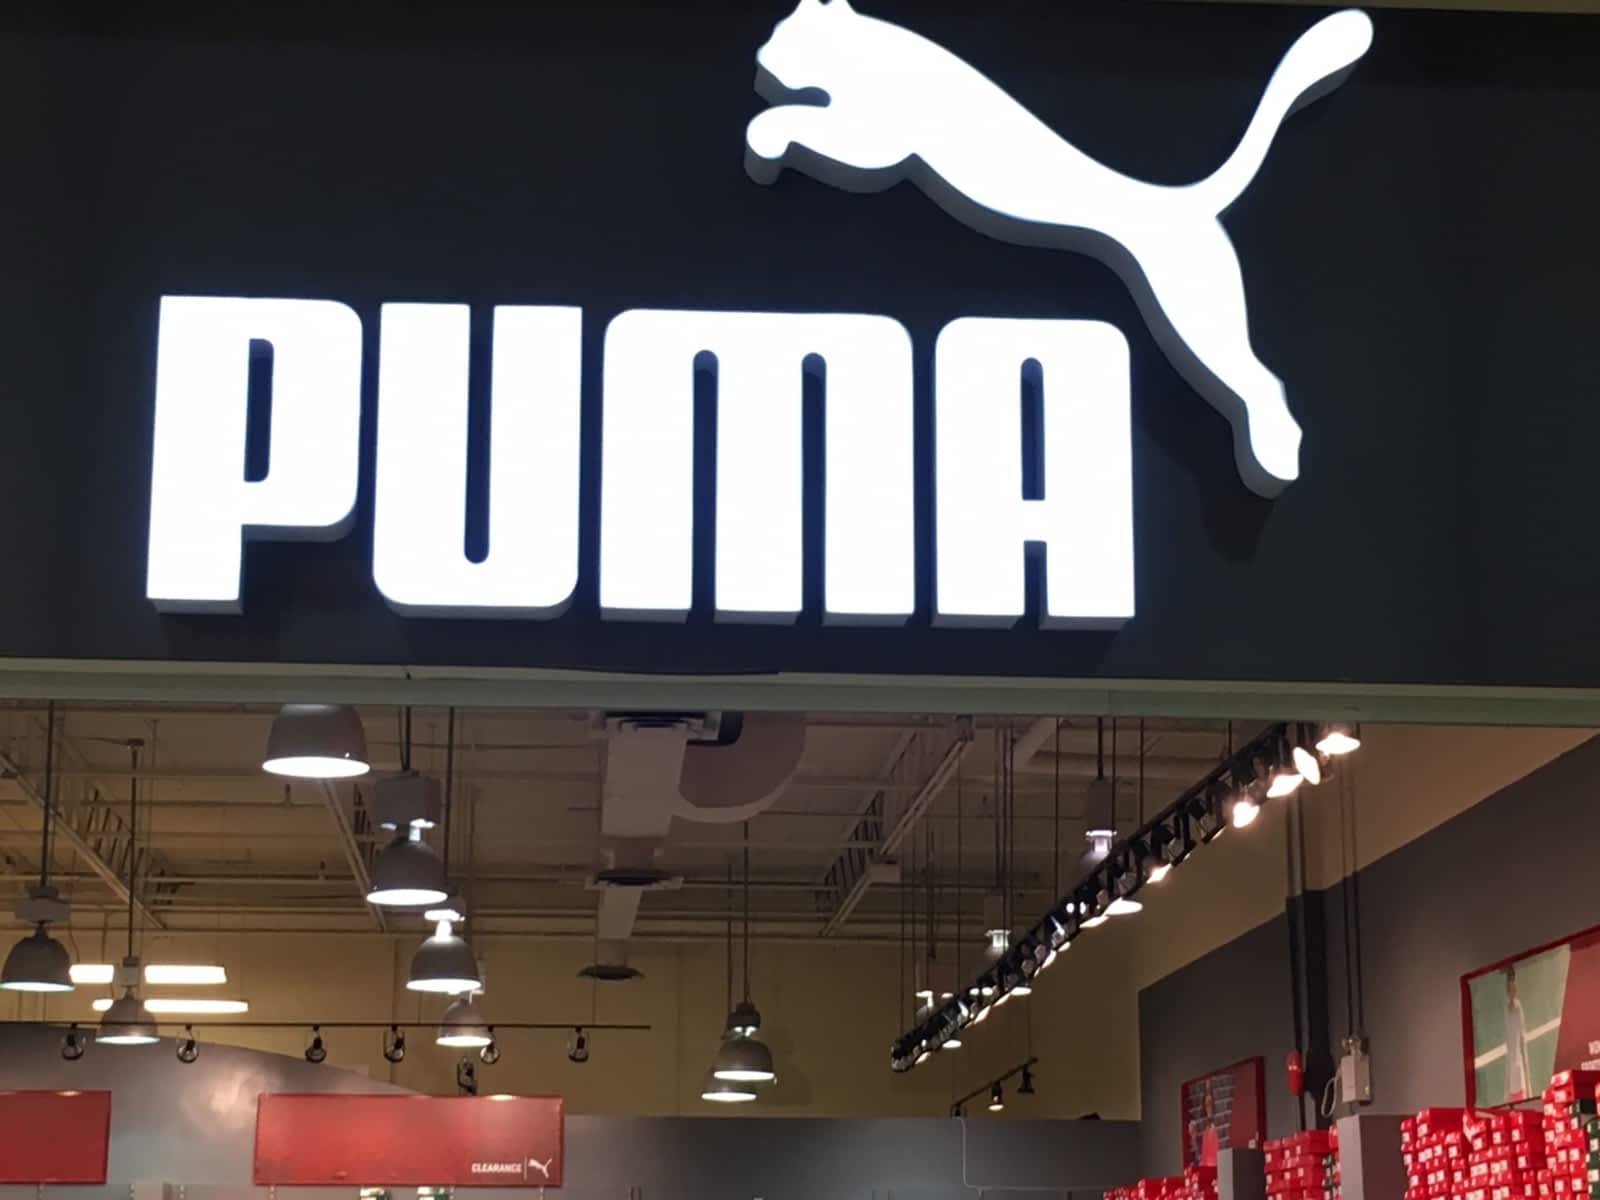 puma outlet mississauga